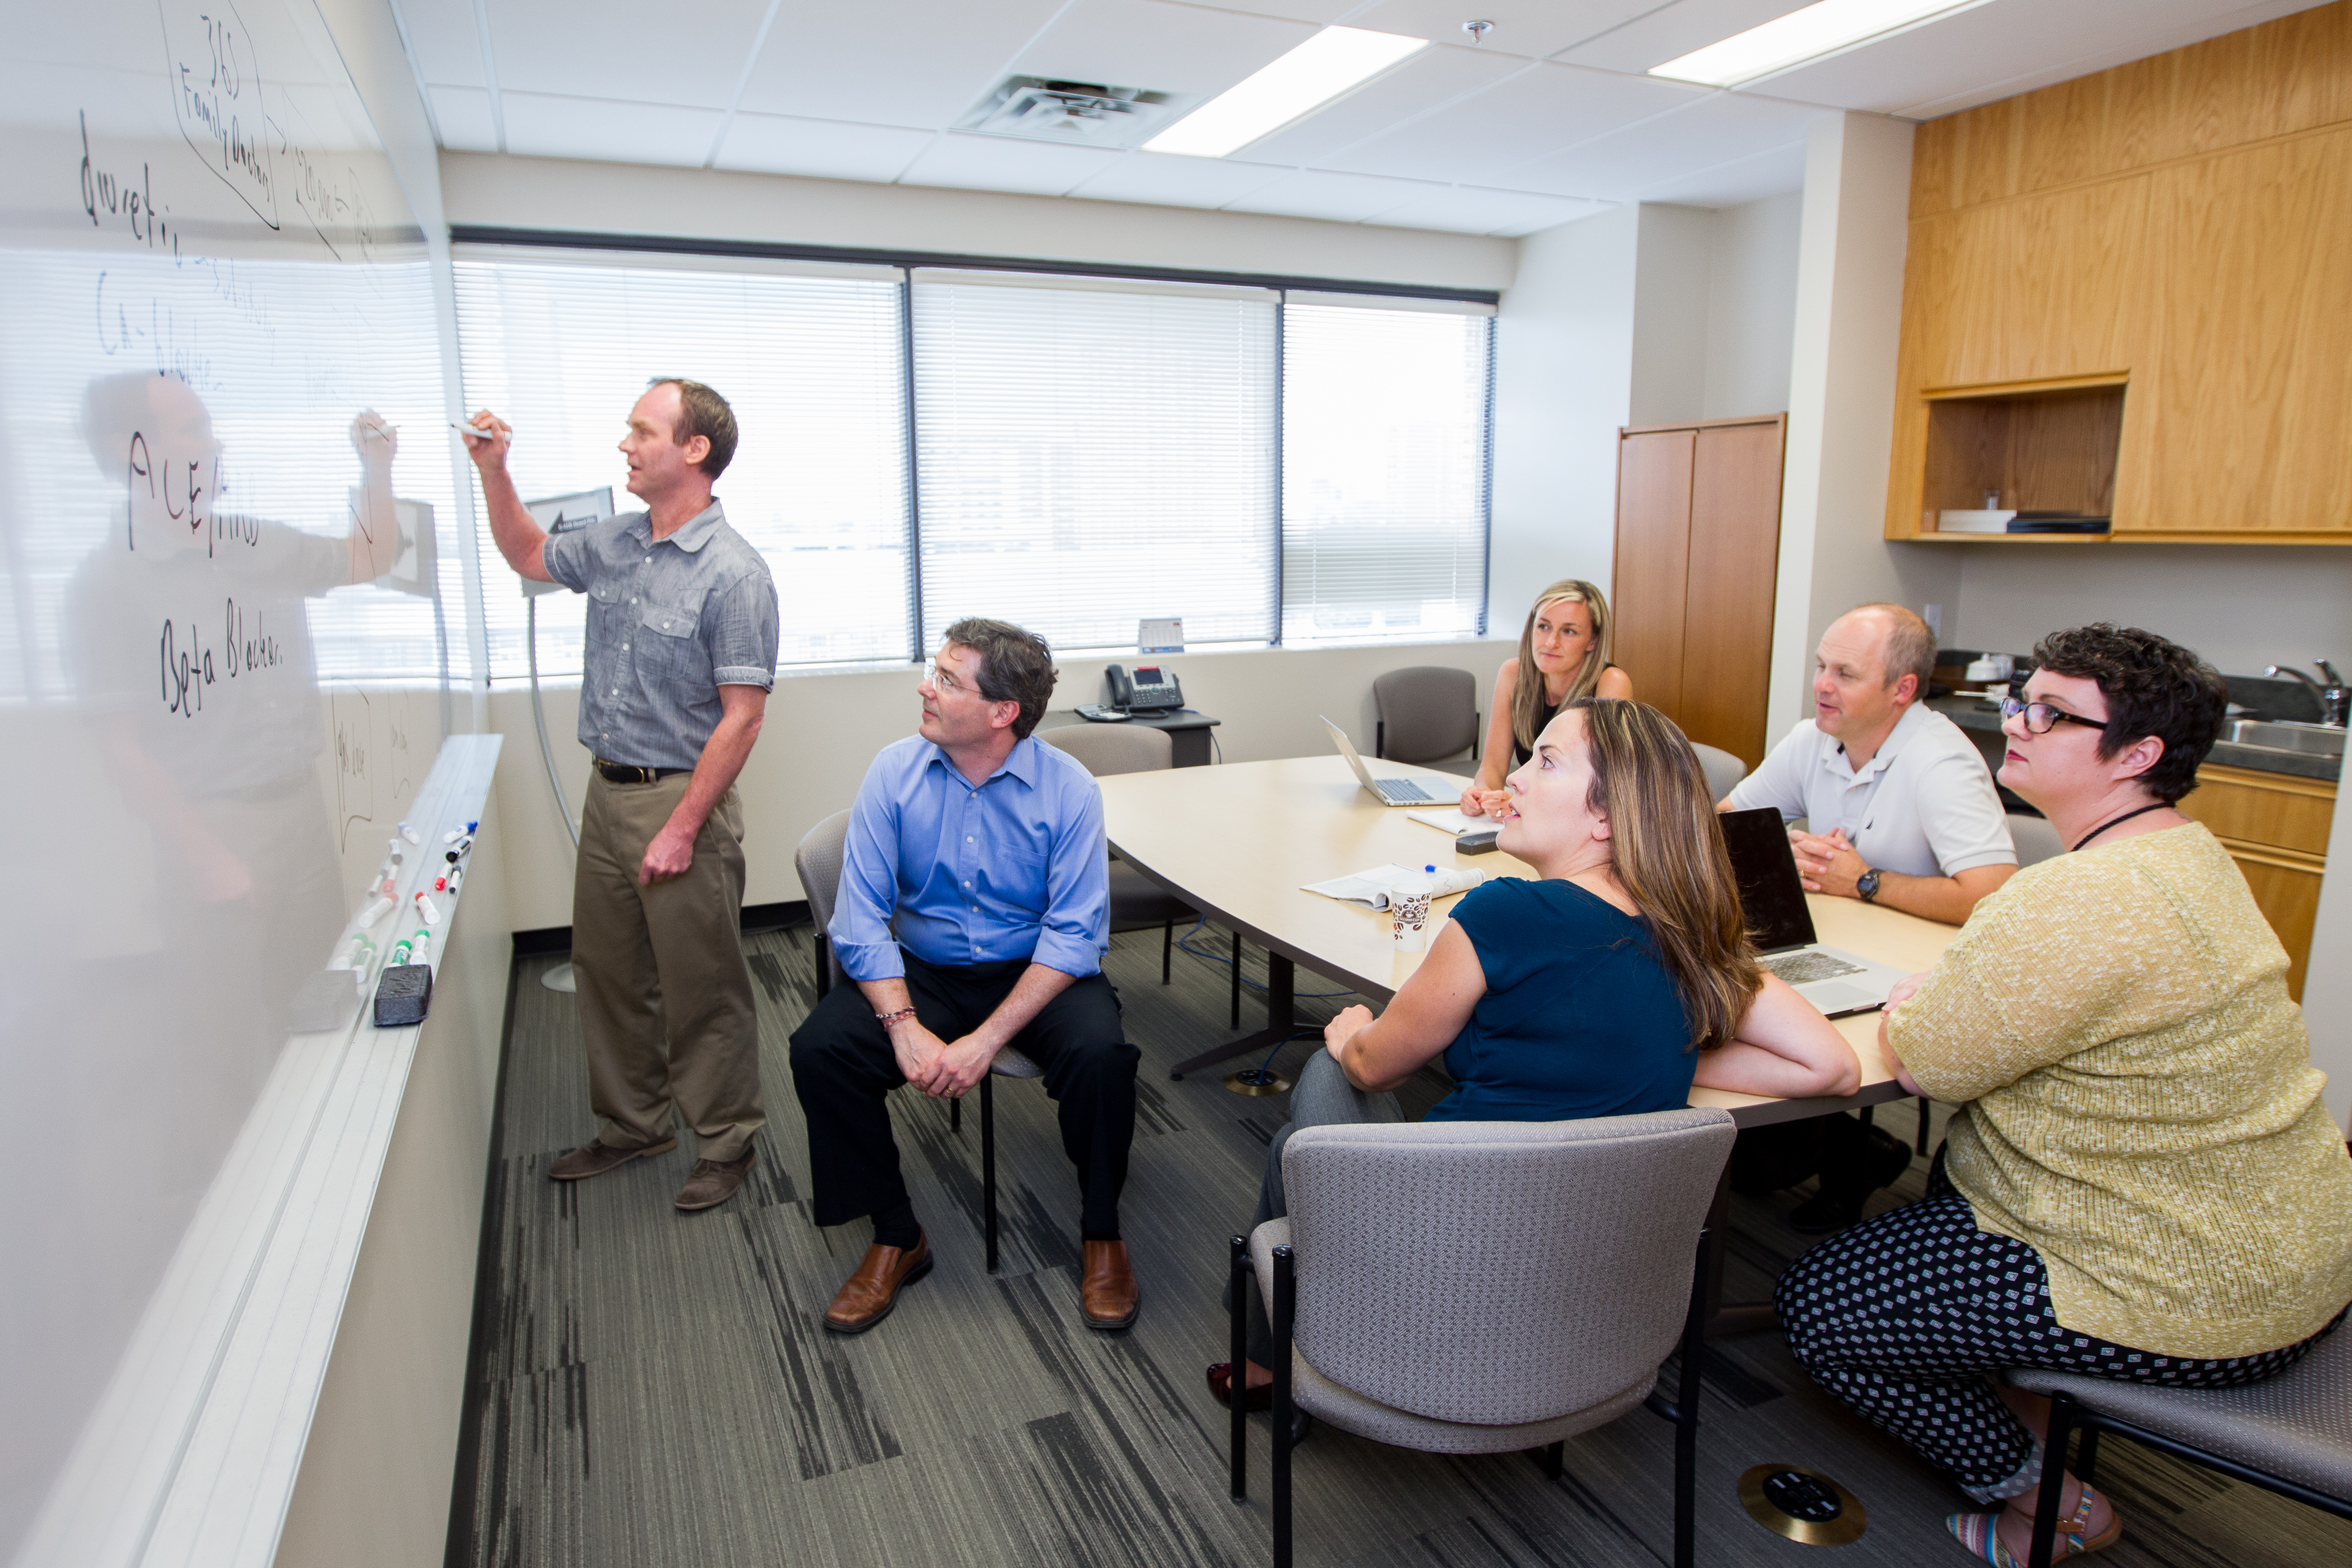 Michael Allan (left) leads a discussion with his team which includes Scott Garrison, Adrienne Lindblad, Tina Korownyk, Michael Kolber, and Sharon Nickel. Colleague James McCormack is absent.